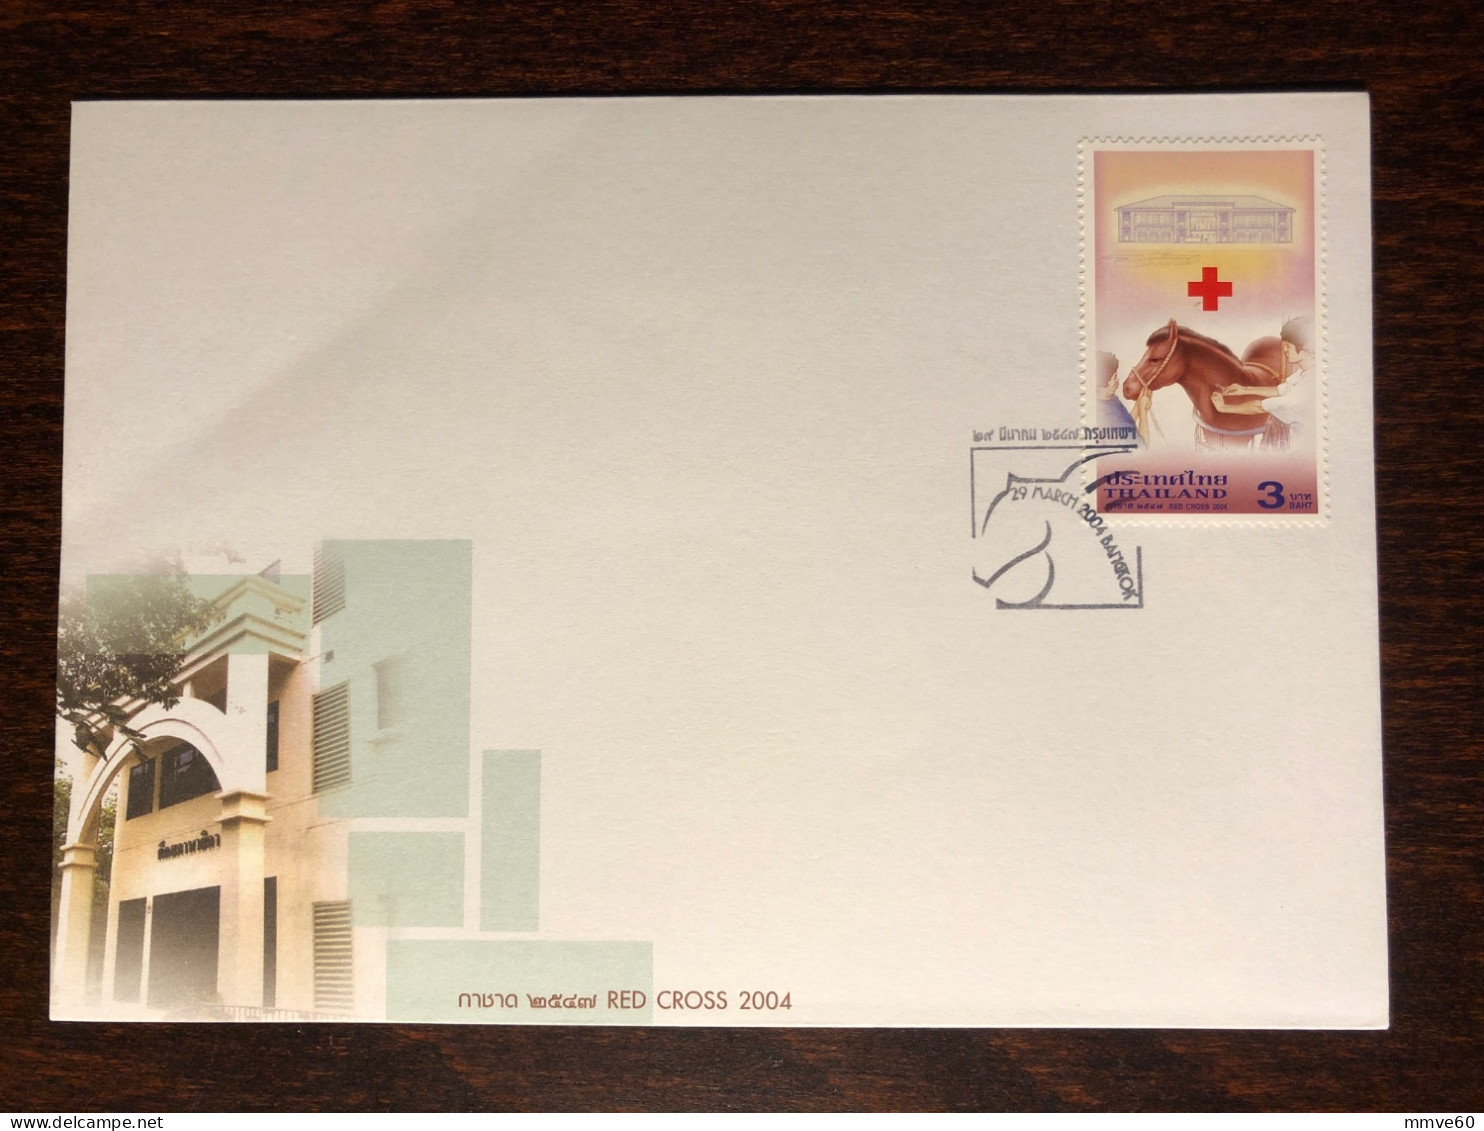 THAILAND FDC COVER 2004 YEAR RED CROSS HEALTH MEDICINE STAMPS - Thailand